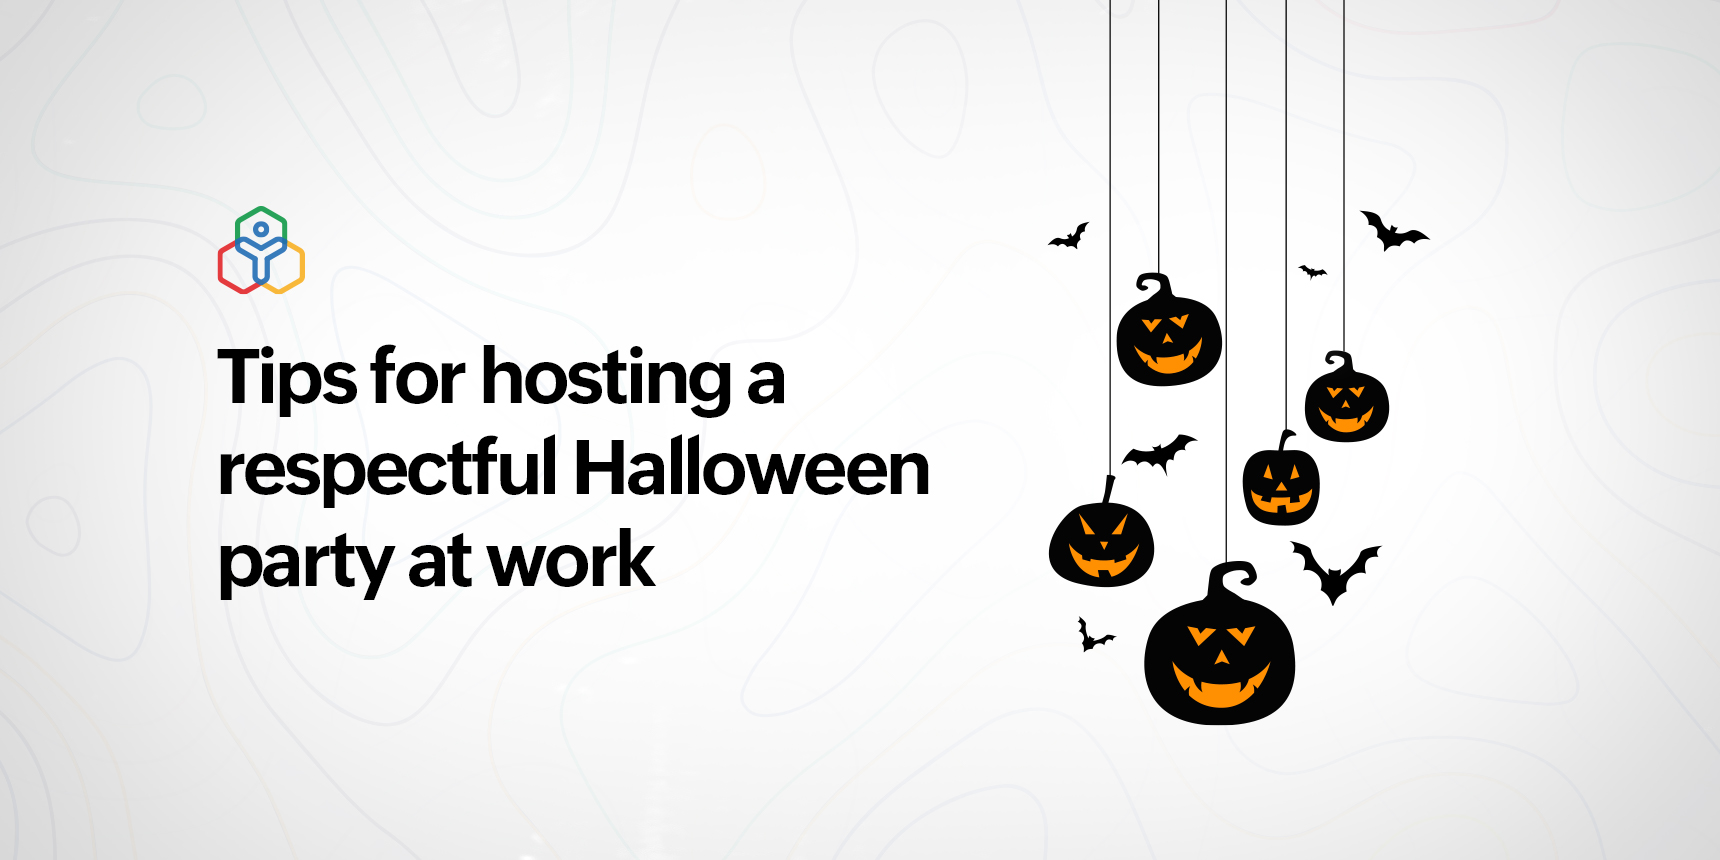 Tips for organizing a respectful Halloween party at work